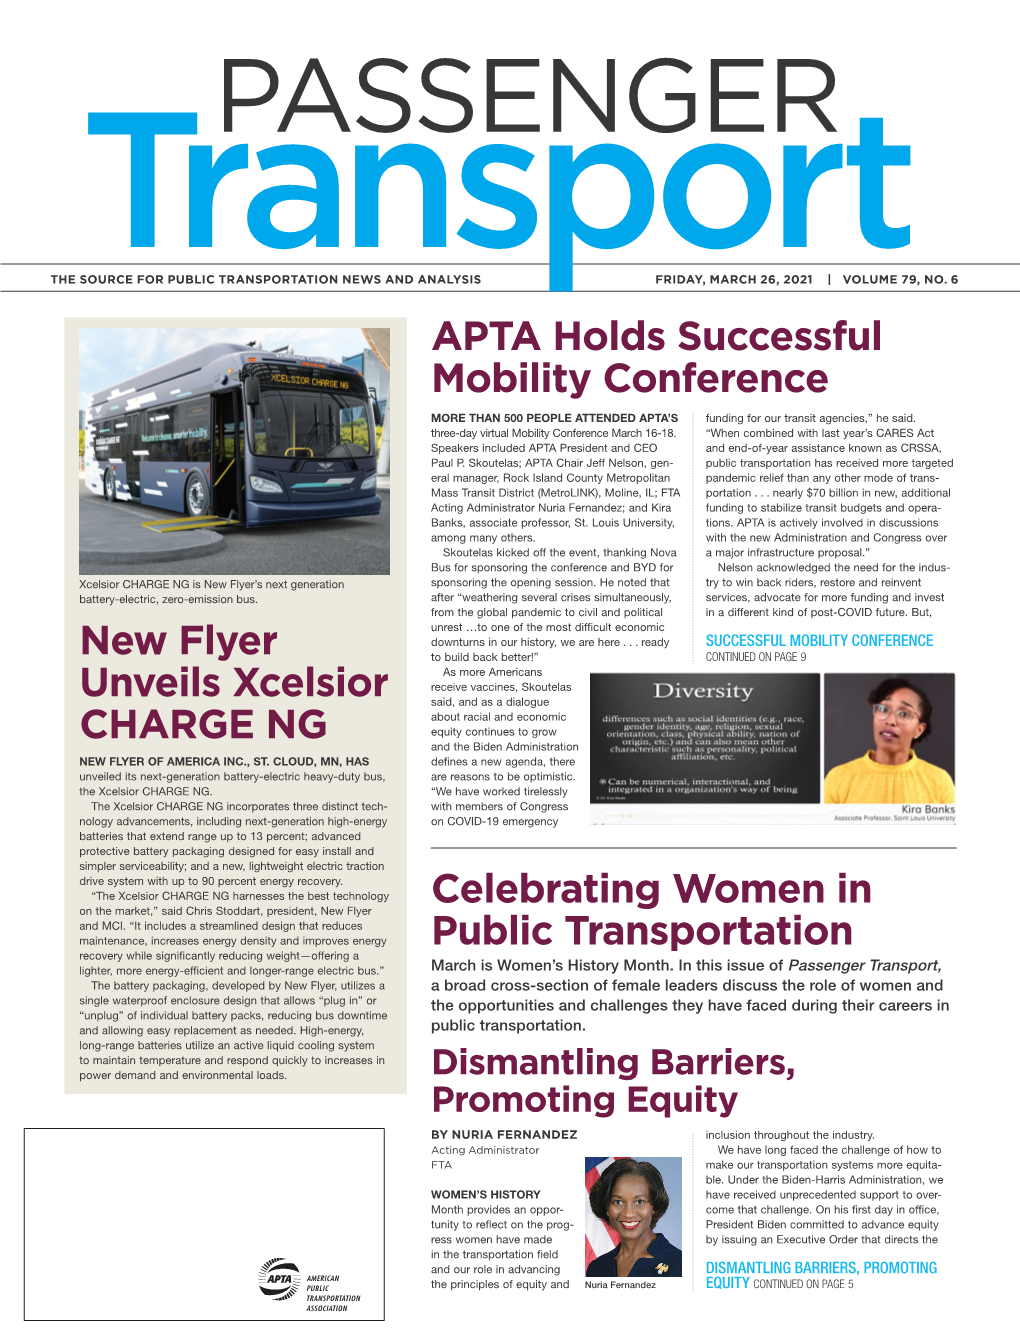 New Flyer Unveils Xcelsior CHARGE NG APTA Holds Successful Mobility Conference Celebrating Women in Public Transportation